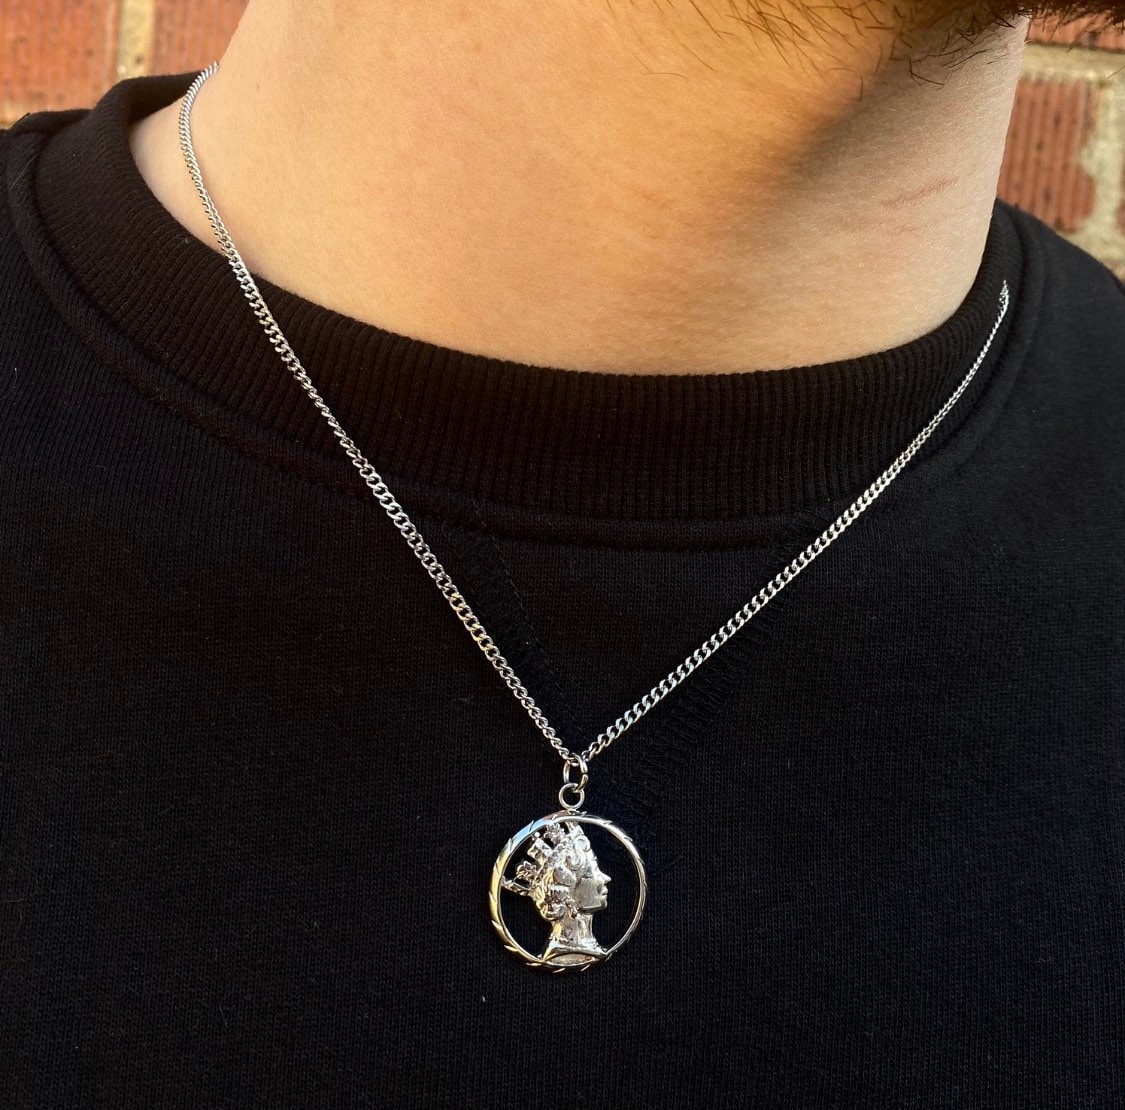 Silver Mens Necklace, Silver Necklace for Men, Compass Pendant Necklace,  Mens Jewelry Onyx Necklace, Silver Chain Necklace, Initial Necklace 